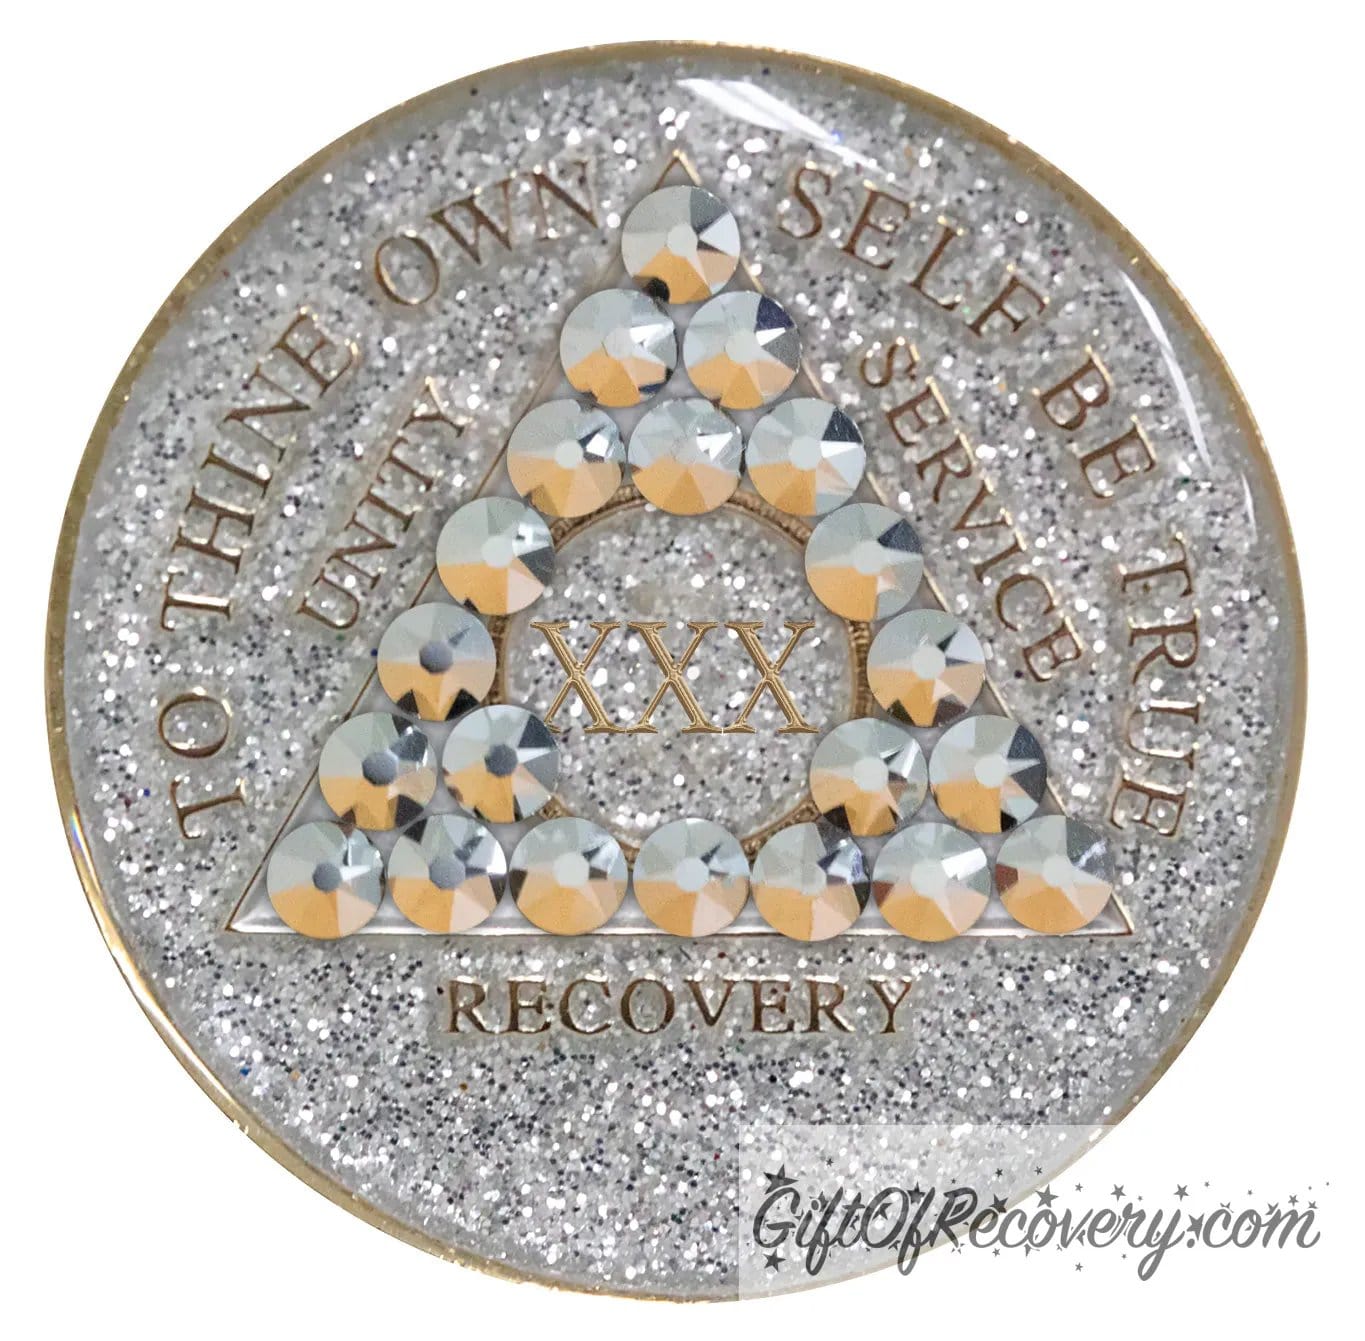 30 year silver glitter AA medallion with 21 genuine comet crystals, forming a triangle around the 1 year, while the year, unity, service, recovery, rim, and To Thine Own Self Be True are embossed in 14k gold, sealed with resin to give it a glossy finish, hand painted and scratch resistant.